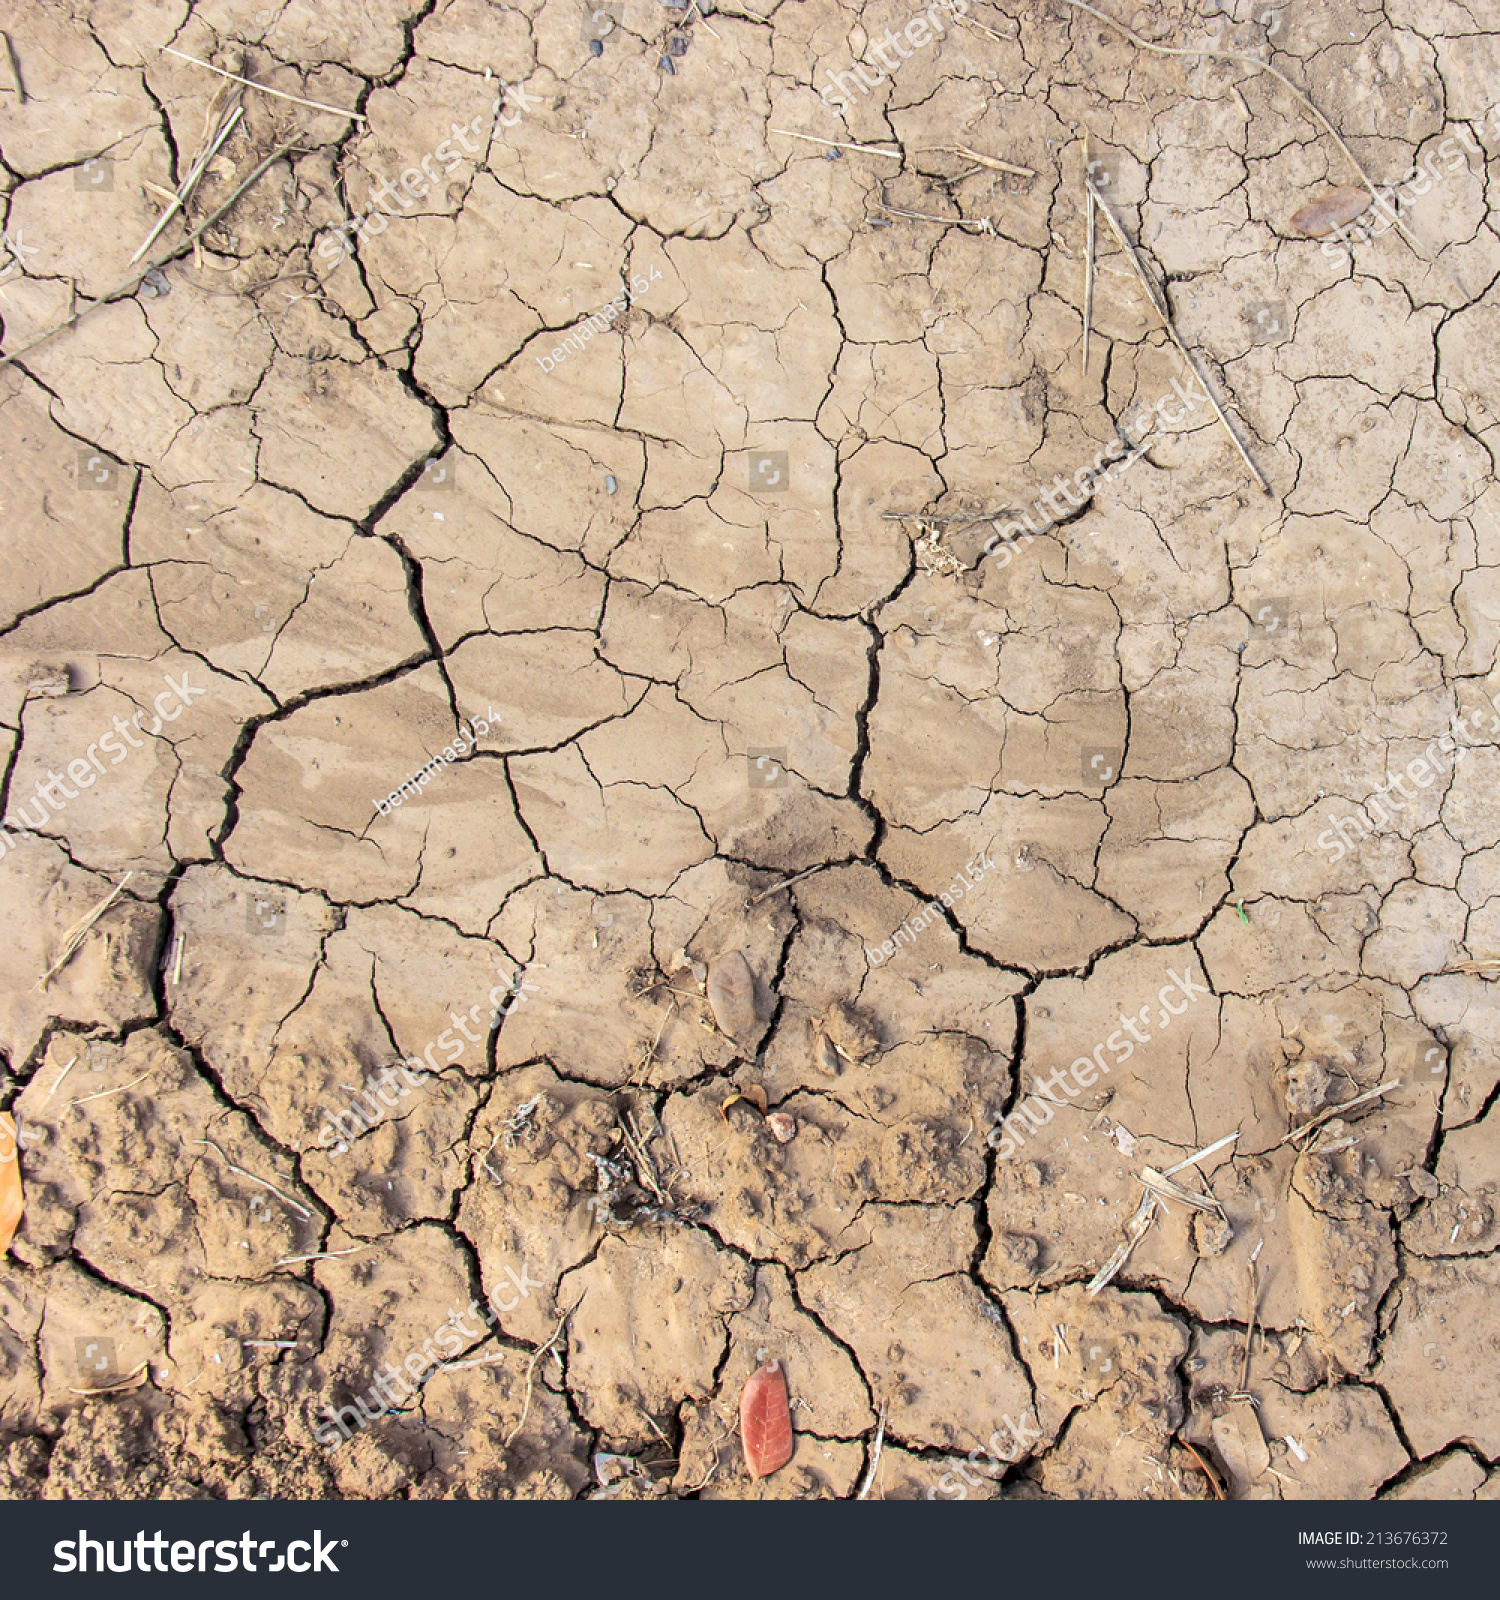 Dry Soil Crack Background Stock Photo (Safe to Use) 213676372 ...